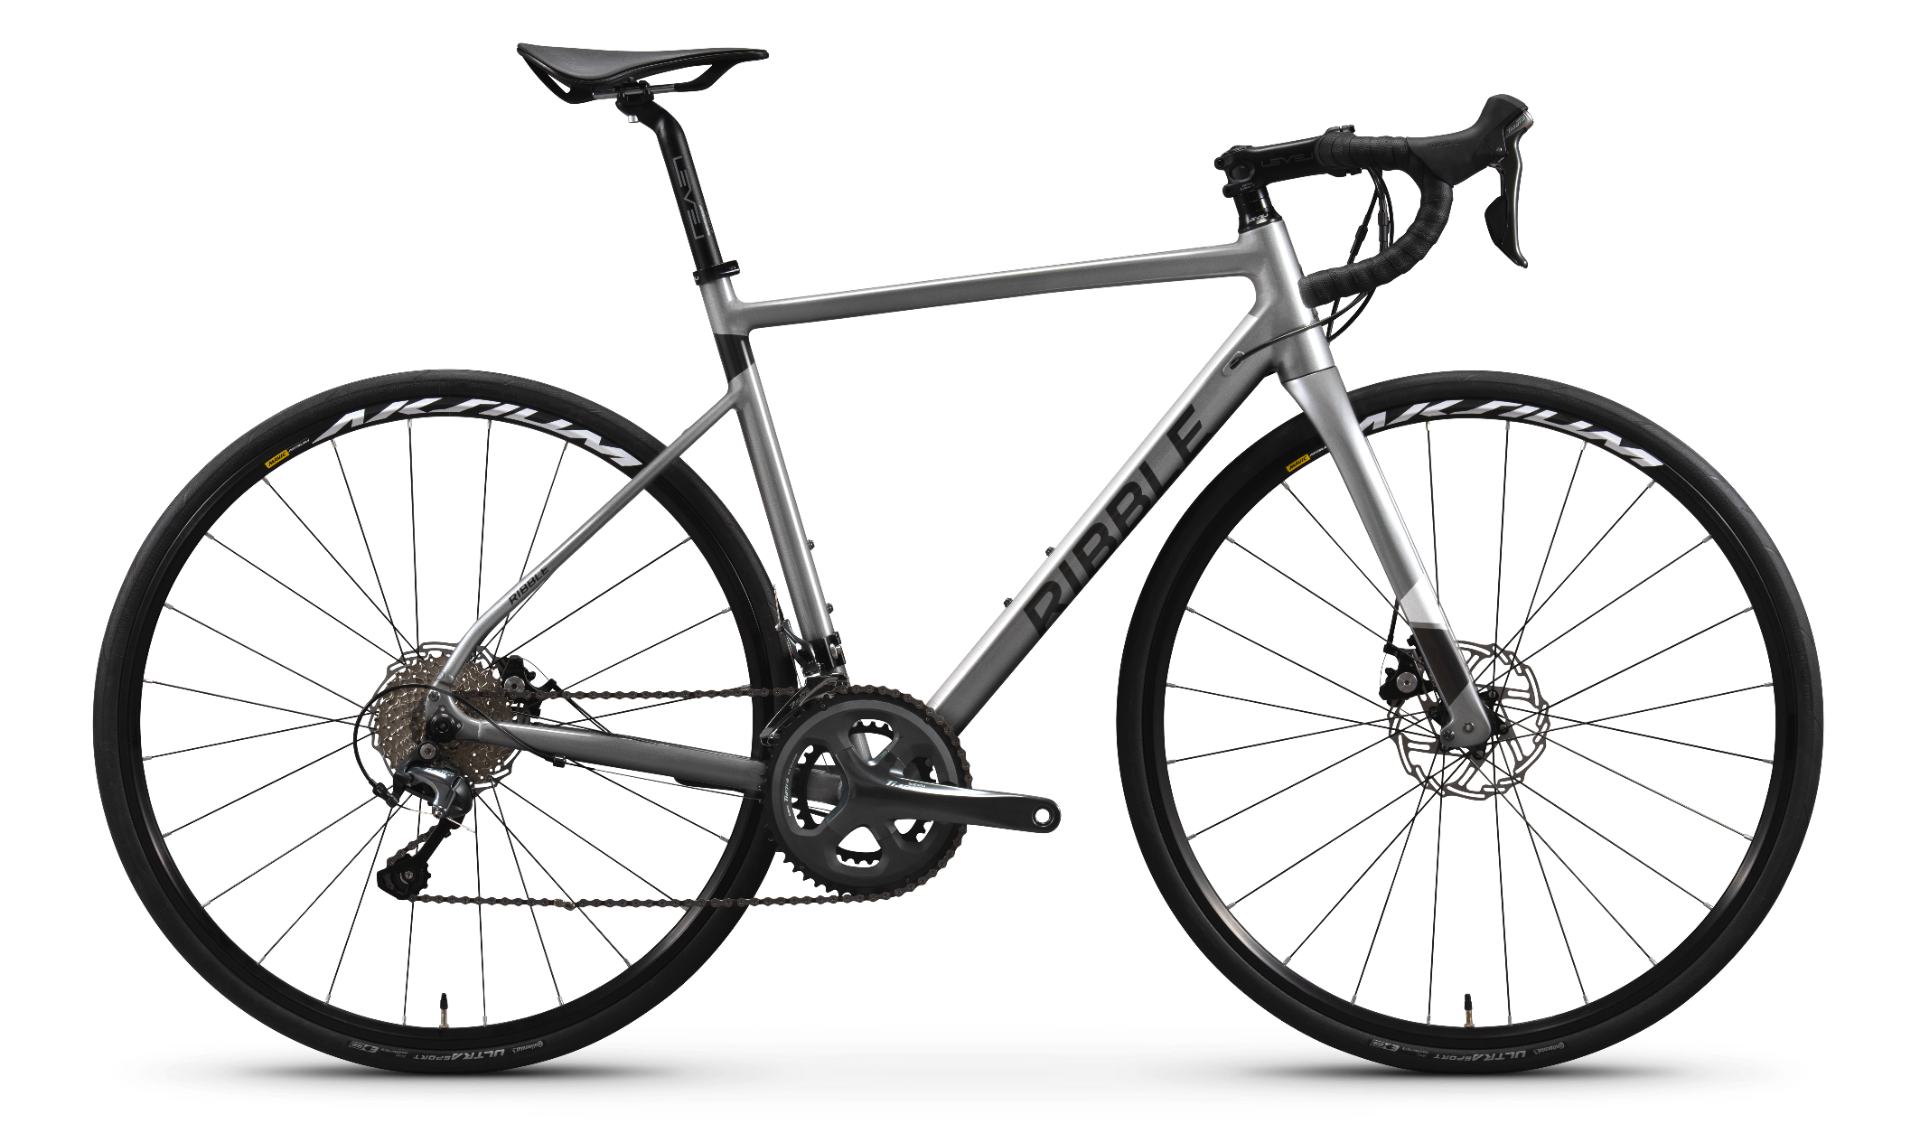 Ribble Endurance AL Disc - Sport from Ribble Cycles